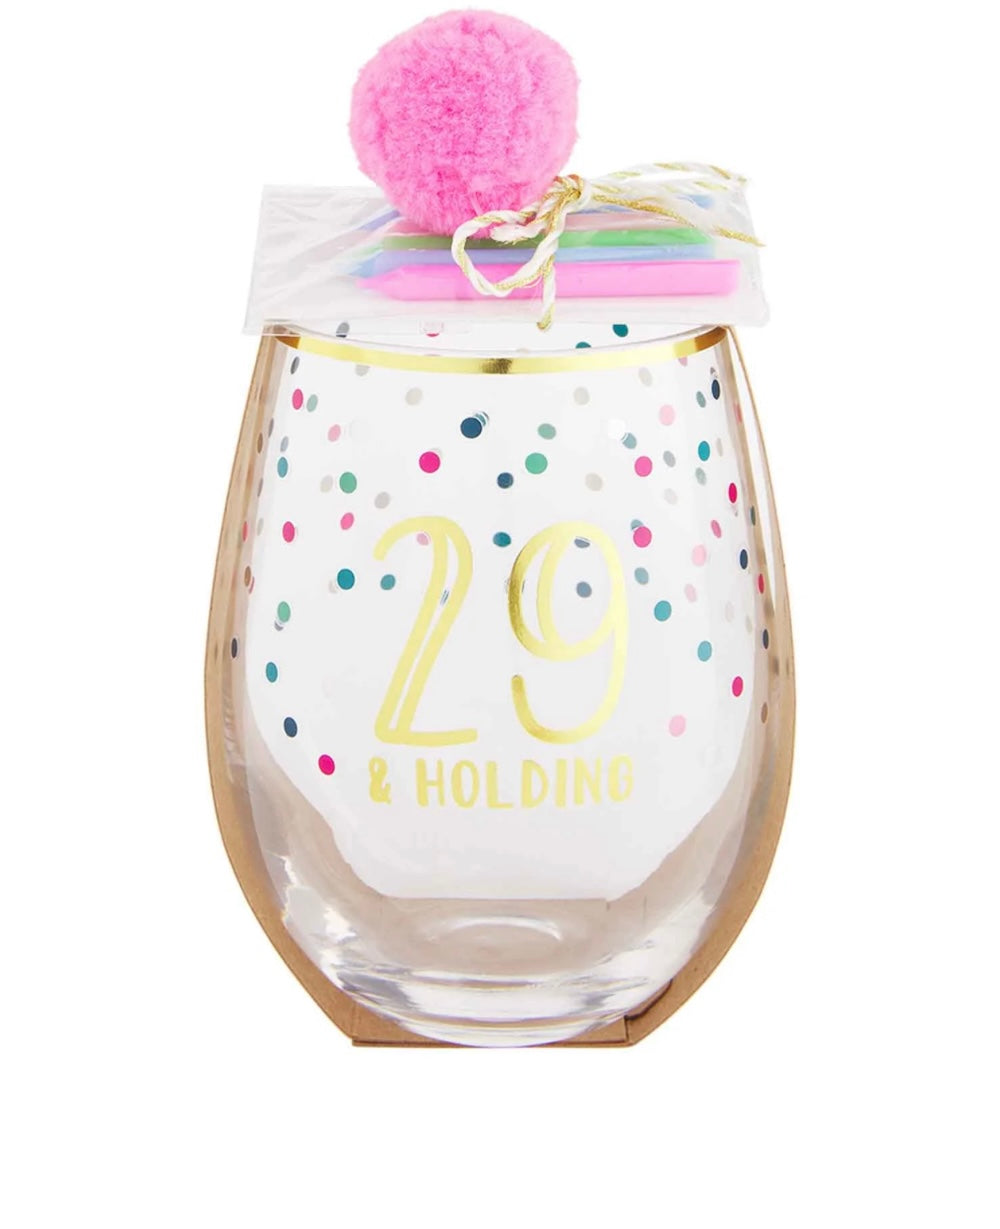 Pink stemless wine glasses with confetti details that says "29 & Holding".